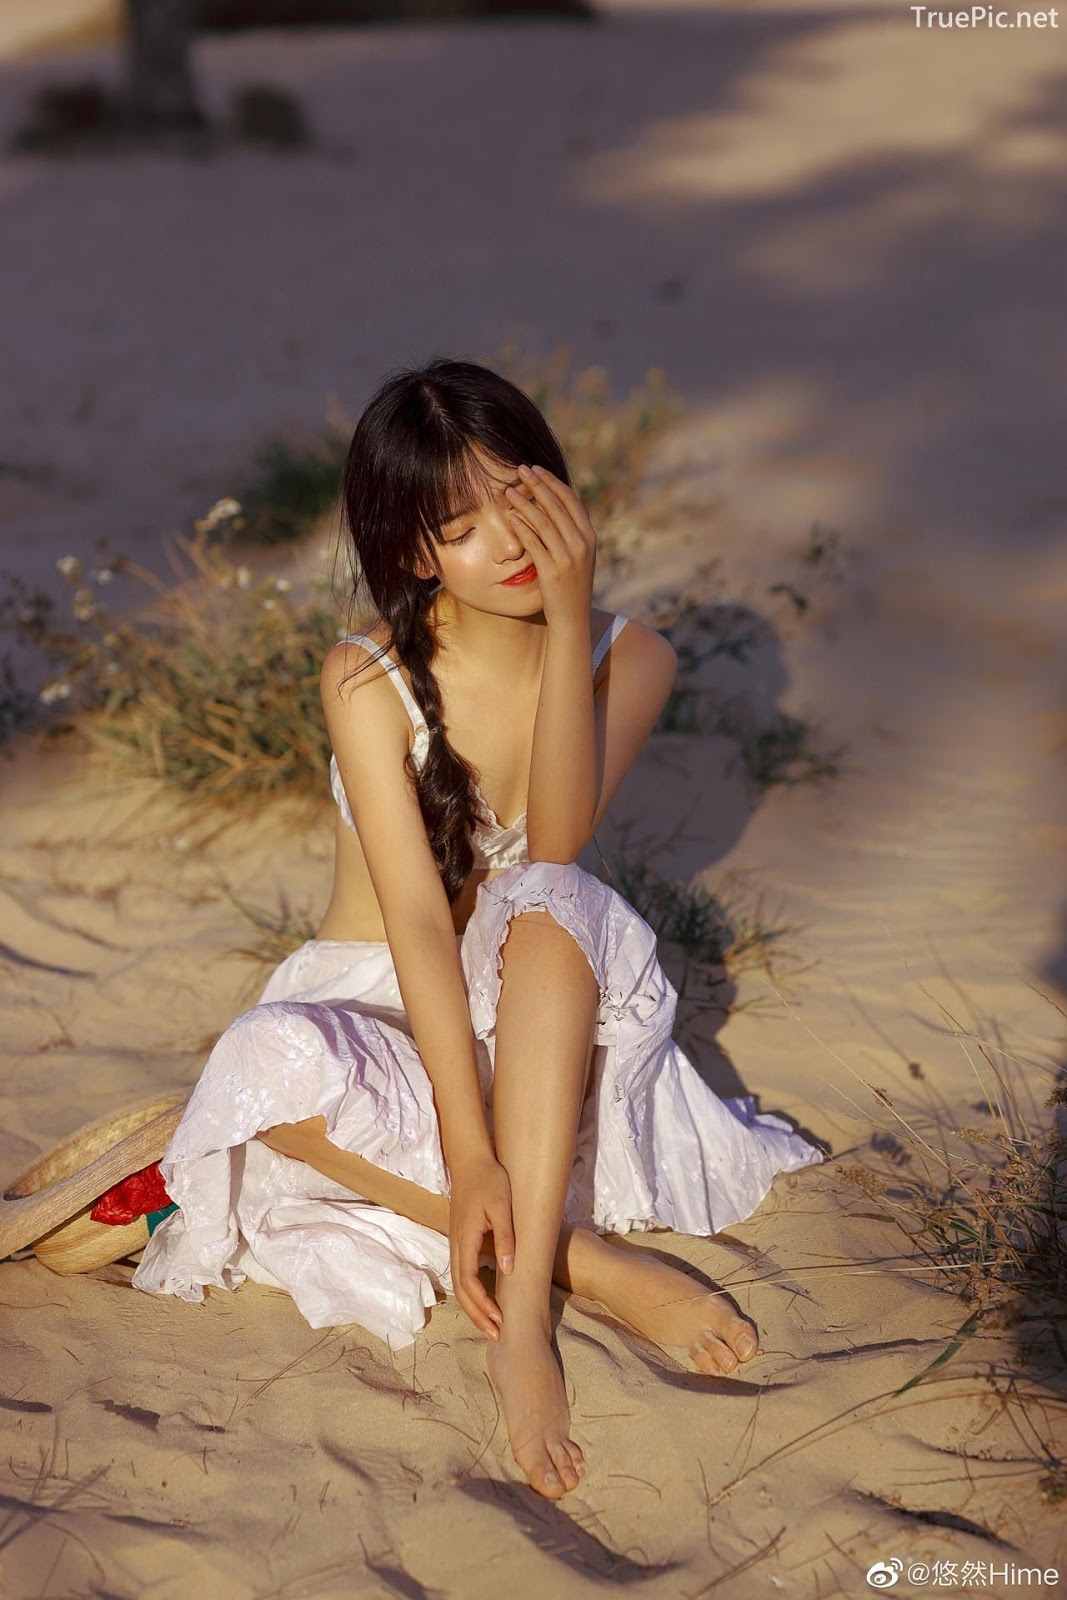 Chinese bautiful angel - Stay with you on a beautiful beach - TruePic.net - Picture 12